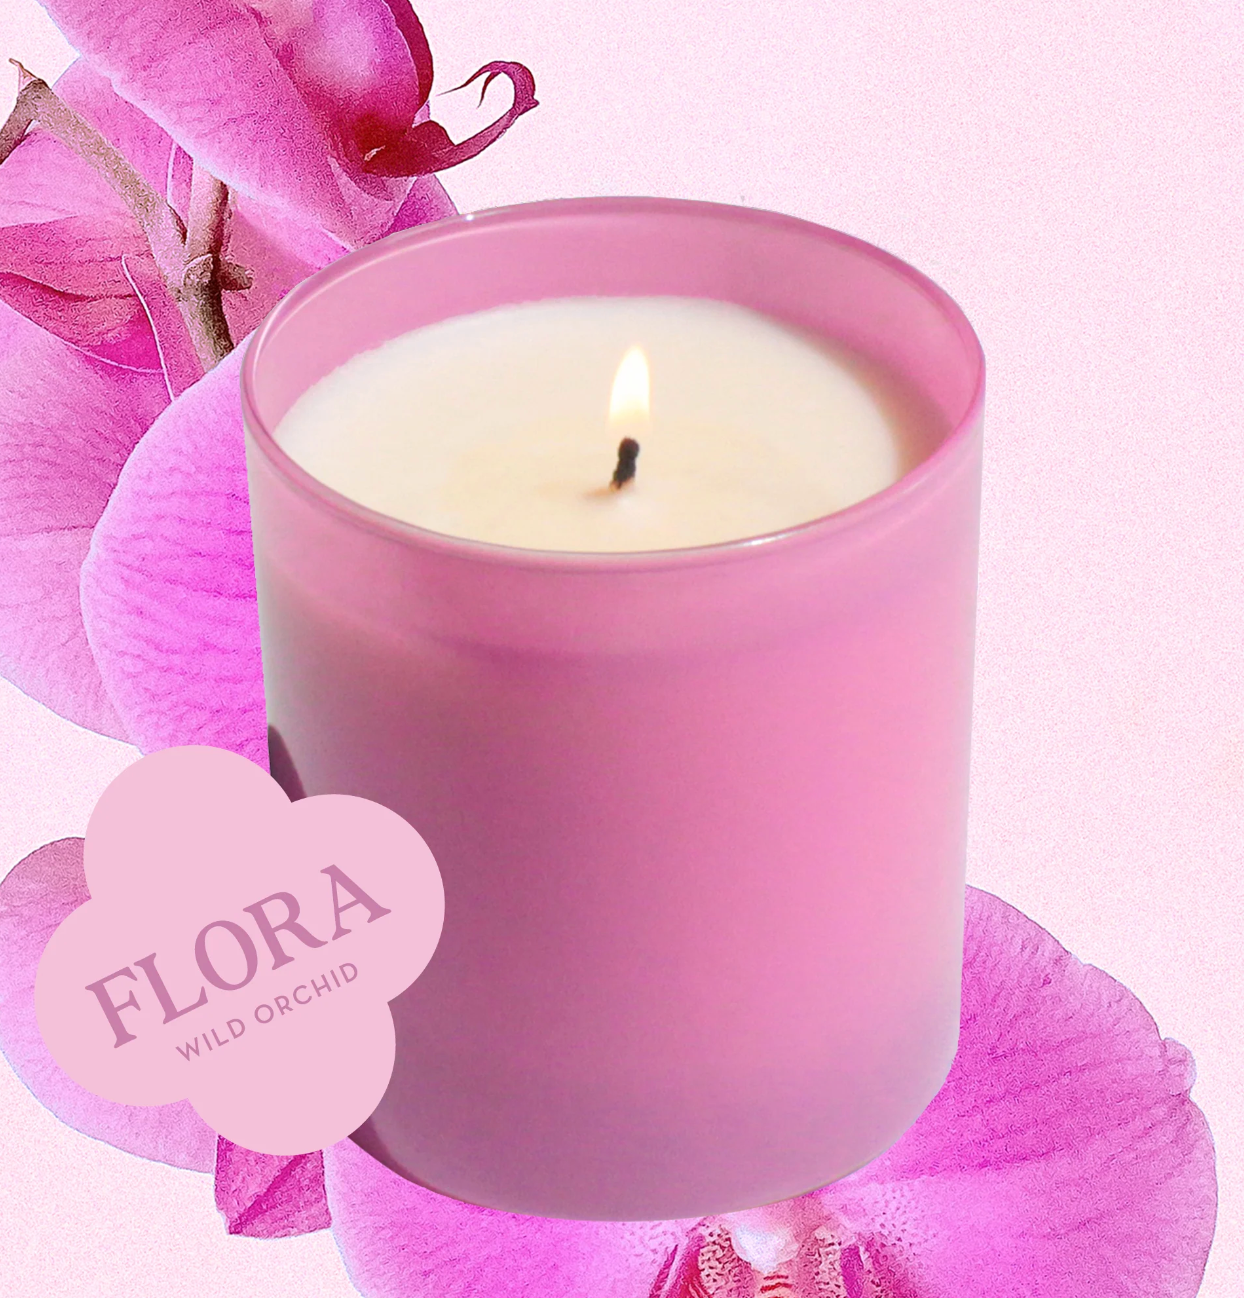 Flora 9 oz. Soy Candle (Wild Orchid)